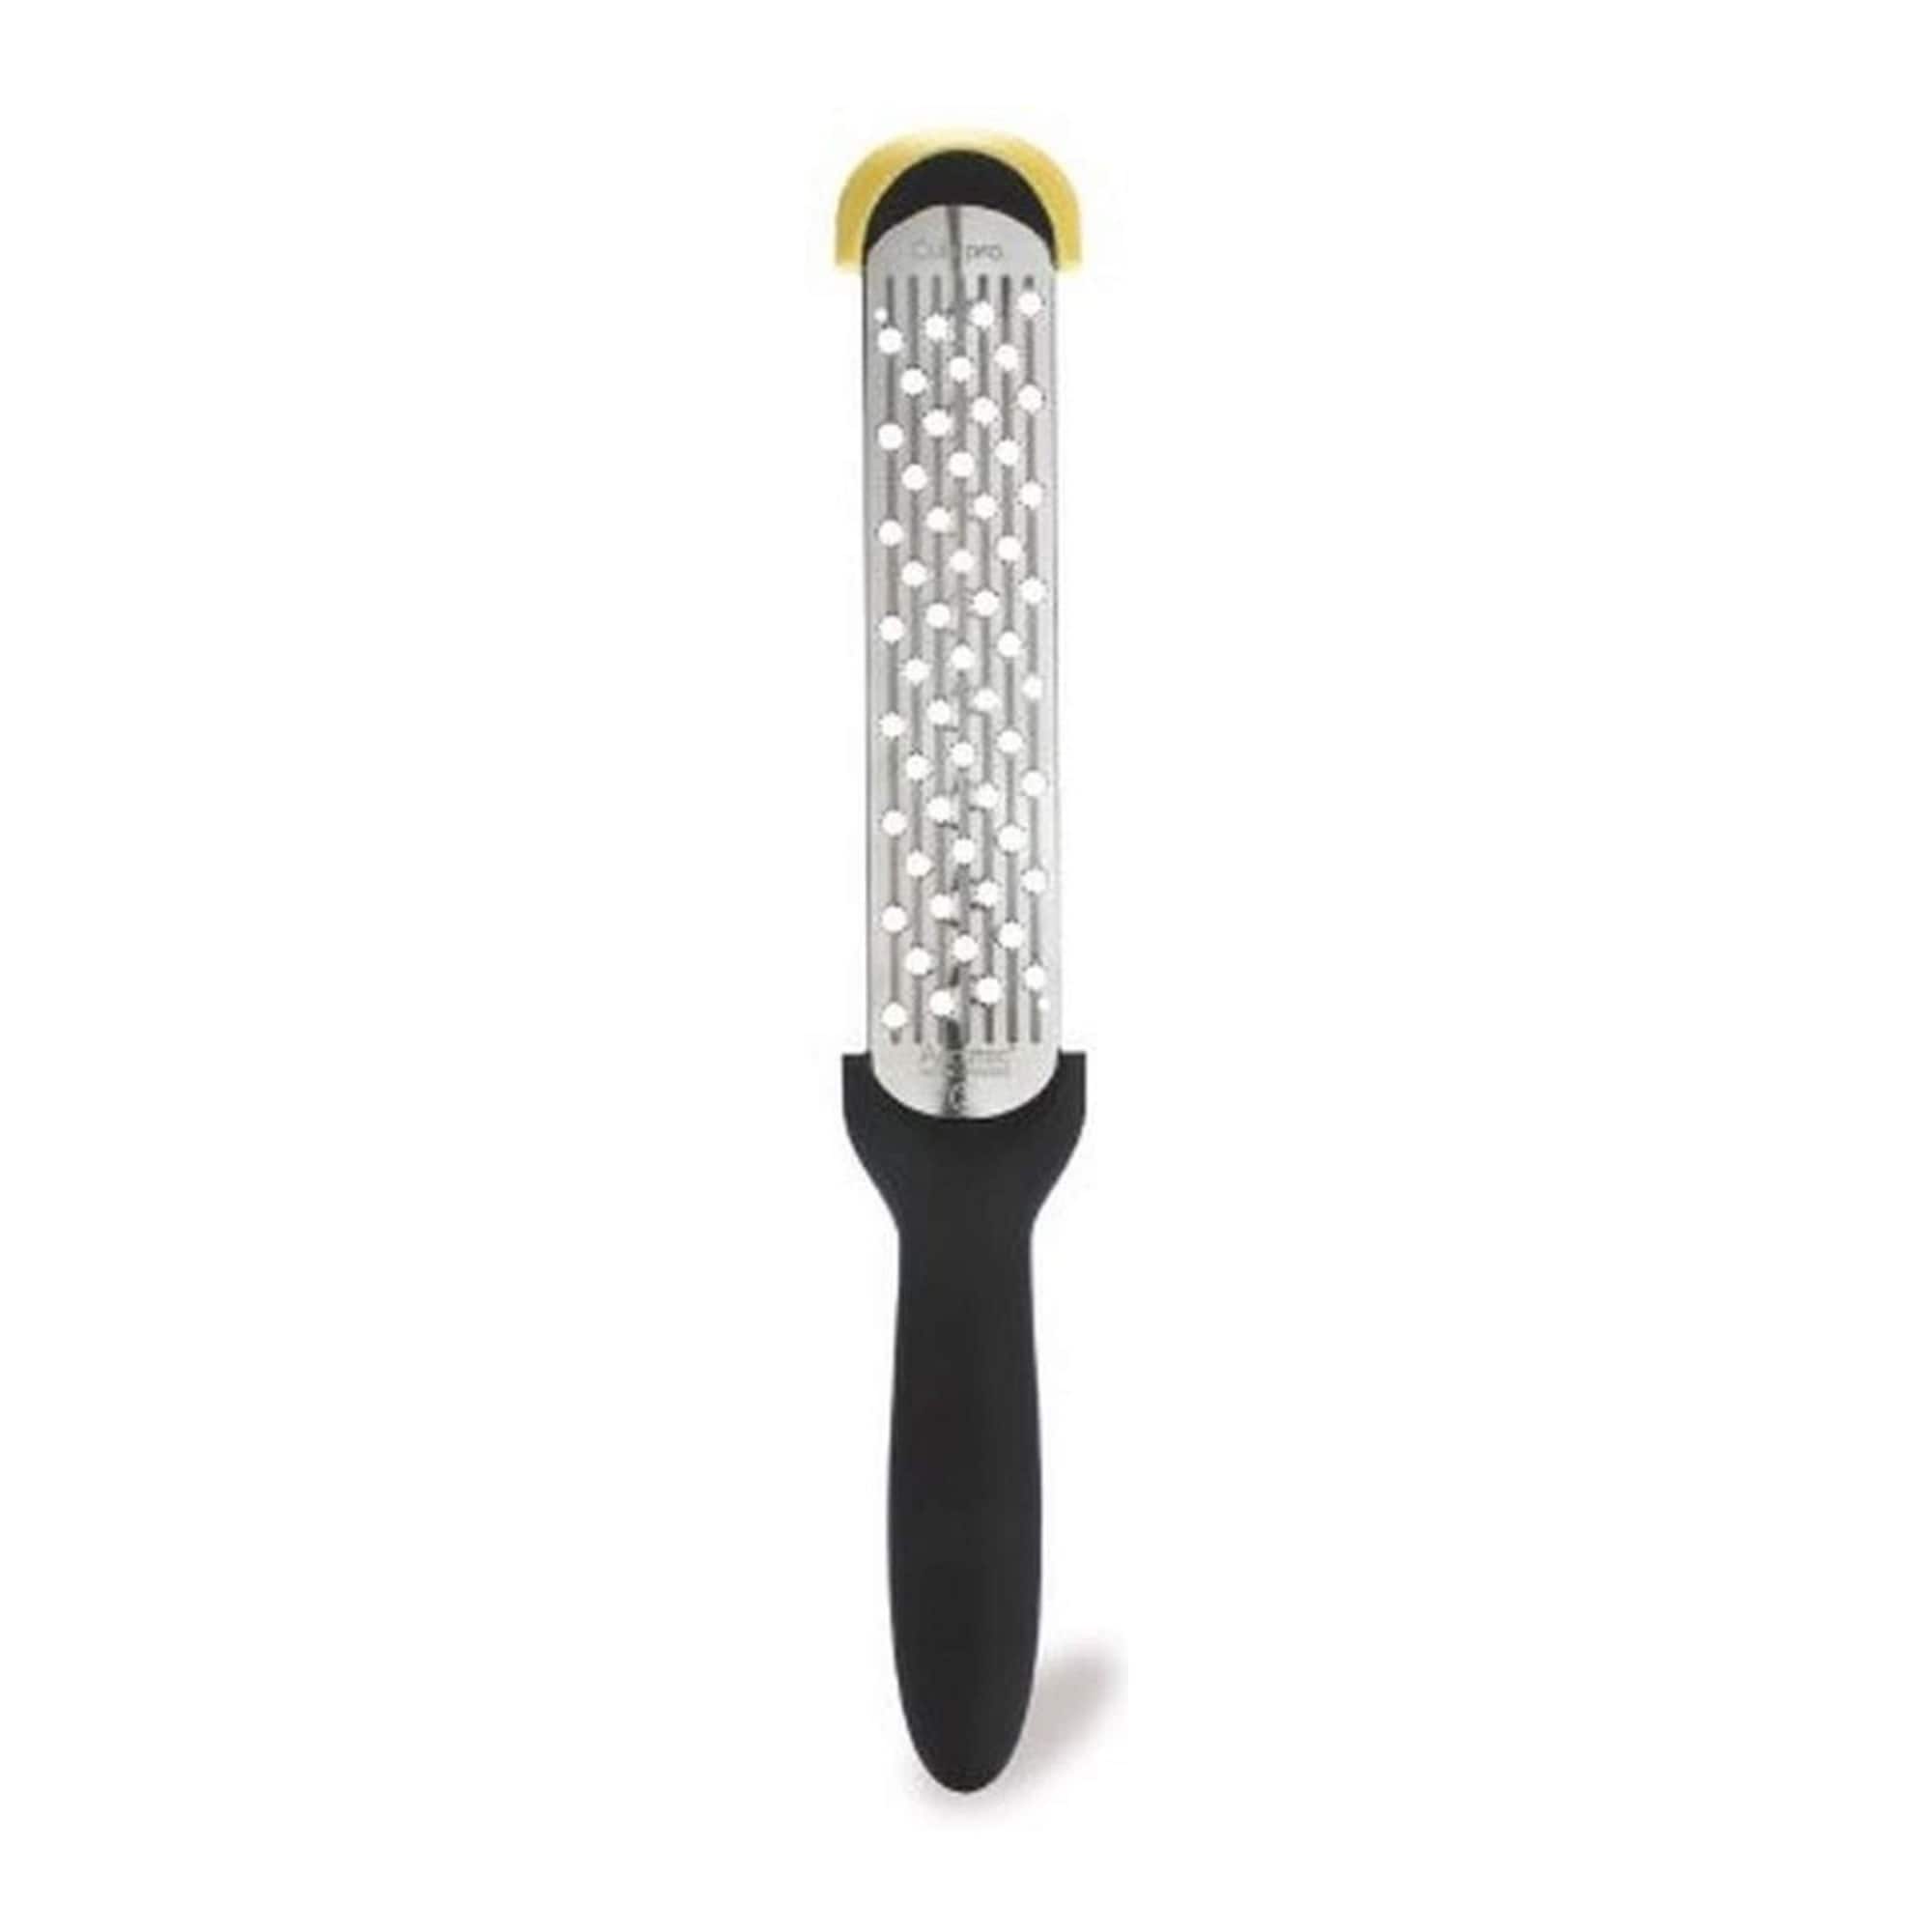 Olive Garden Style Parmesan Rotary Cheese Grater - On Sale - Bed